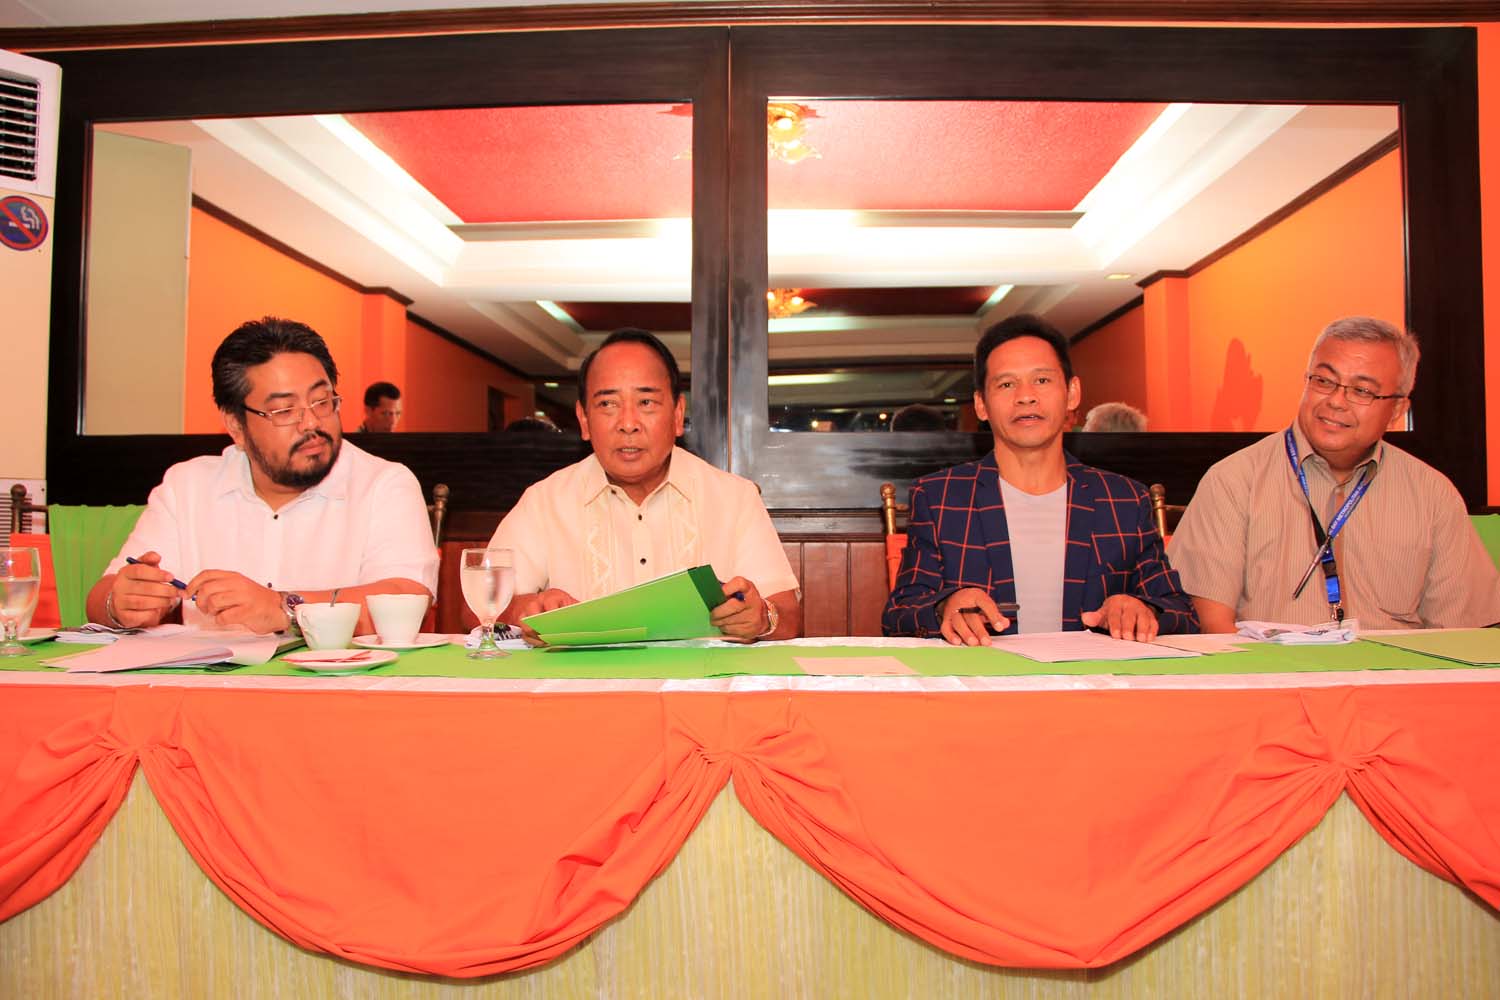 SBMA Chairman and Administrator Roberto V. Garcia (2nd from left) signs a memorandum of agreement with Alfonso Borda, President and CEO of Lyceum of Subic Bay, for the 25-year extension of the lease for the Lyceum campus in the Subic Bay Freeport Zone. Serving as witnesses to the agreement are SBMA Director Benjamin Antonio (left) and SBMA Deputy Administrator for Administration Fernando De Villa.